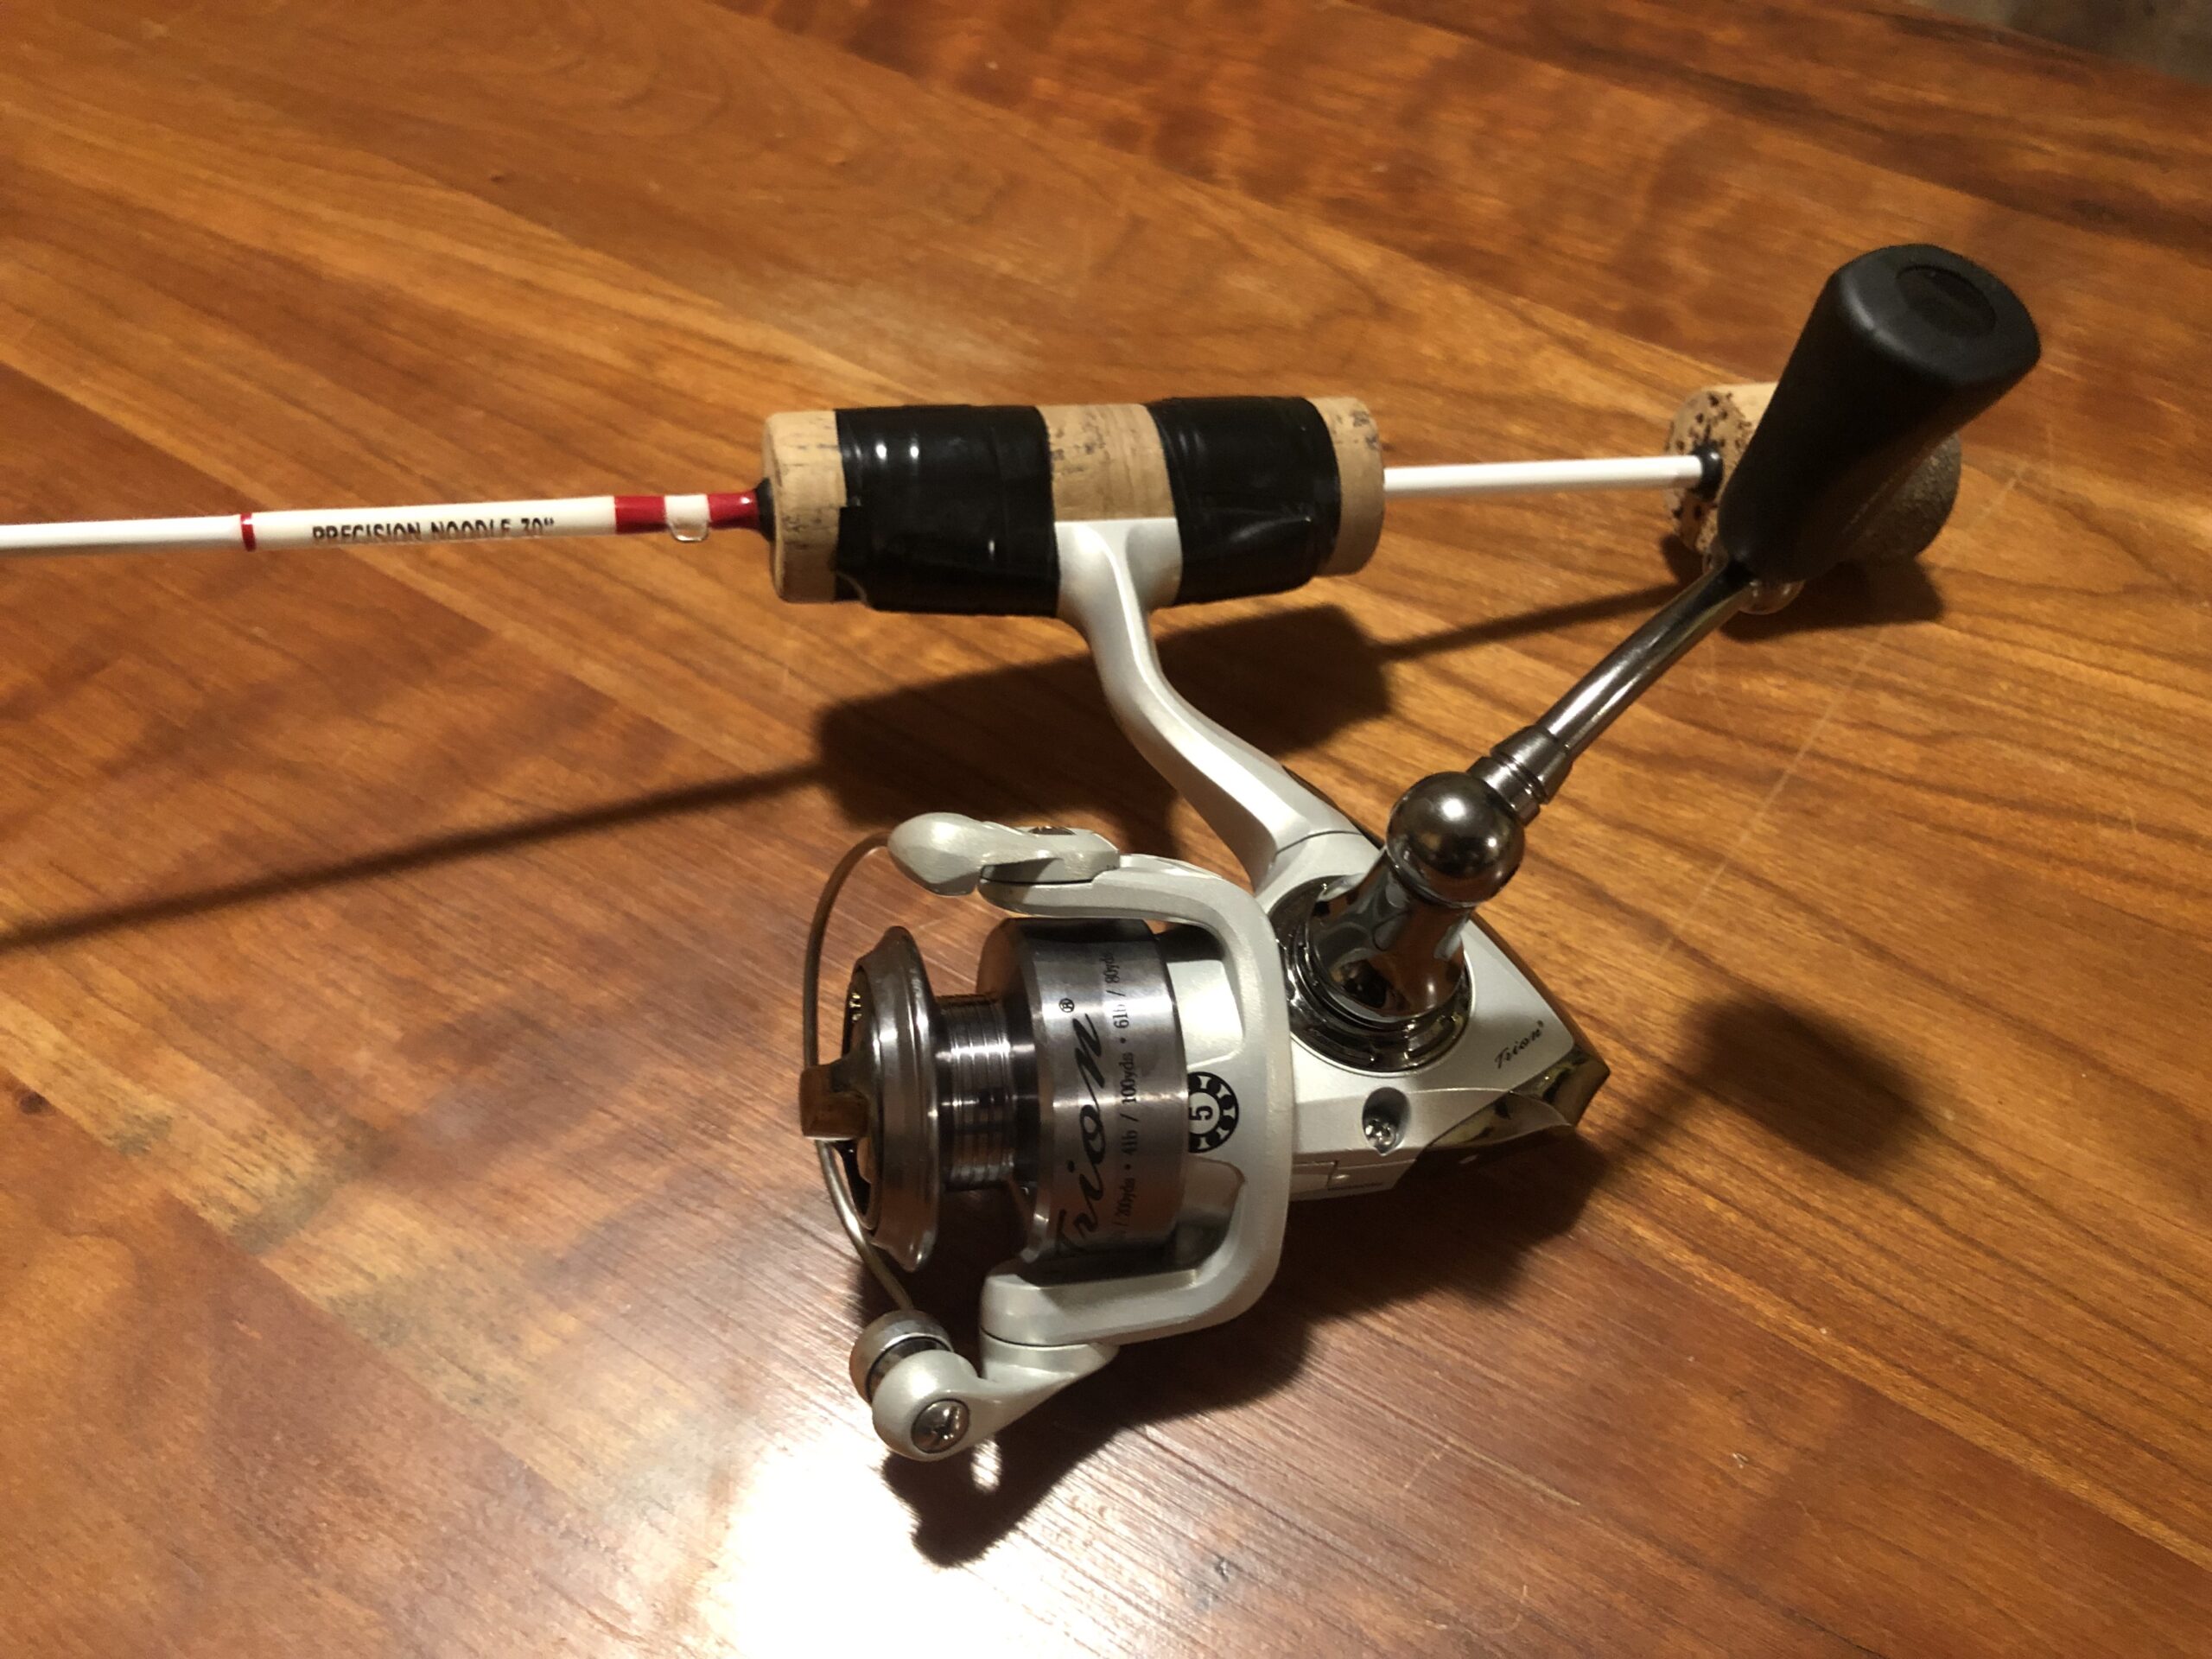 Tuned Up Custom Precision Noodle w/ a Pflueger Trion reel - Classified Ads  - Classified Ads